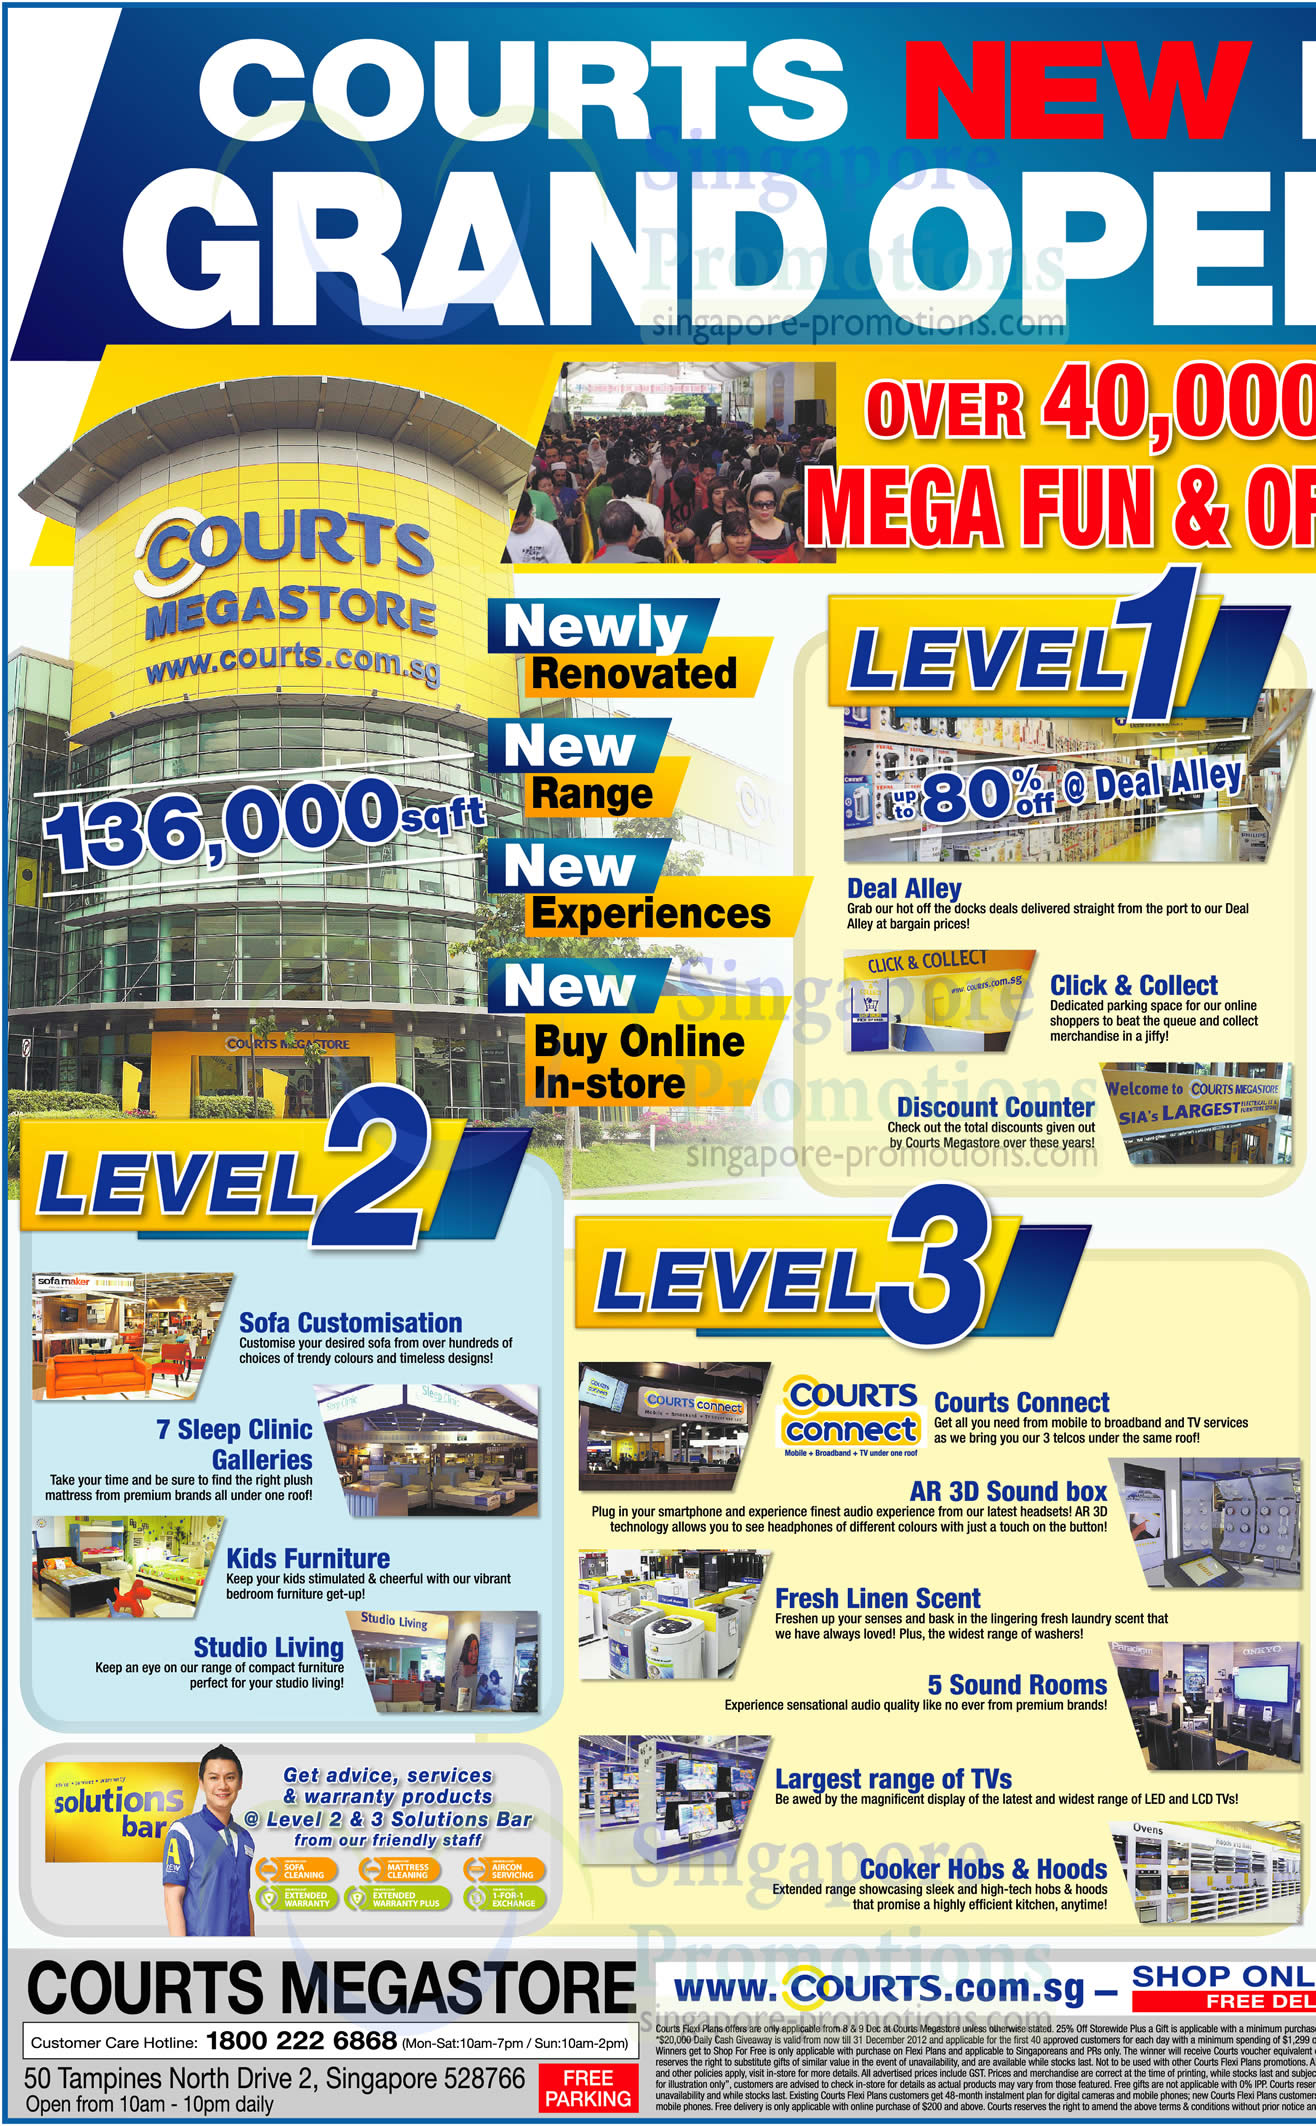 Featured image for Courts New Megastore Grand Opening Sale 1 - 2 Dec 2012